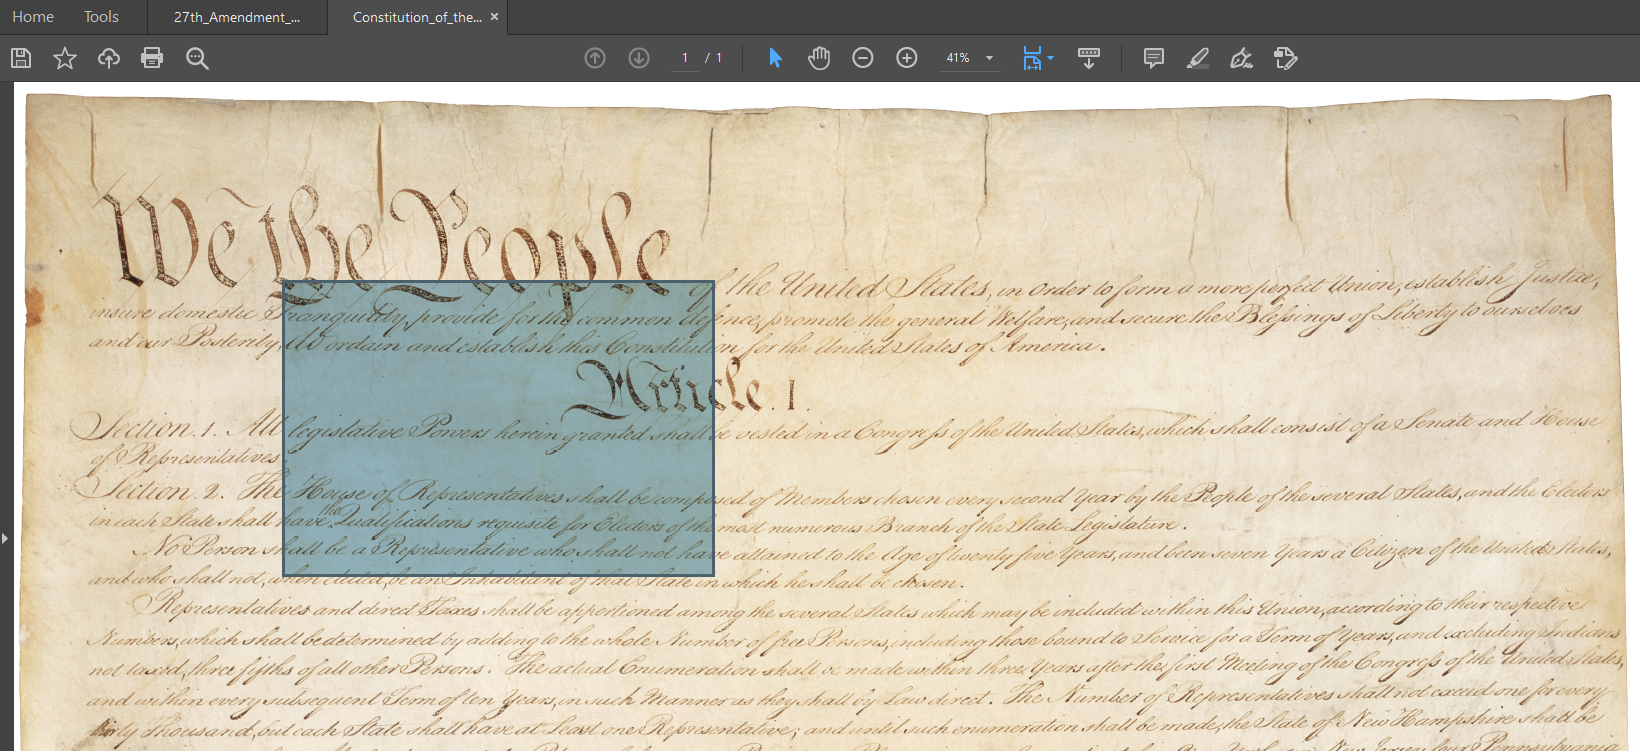 US Constitution as PDF without searchable text